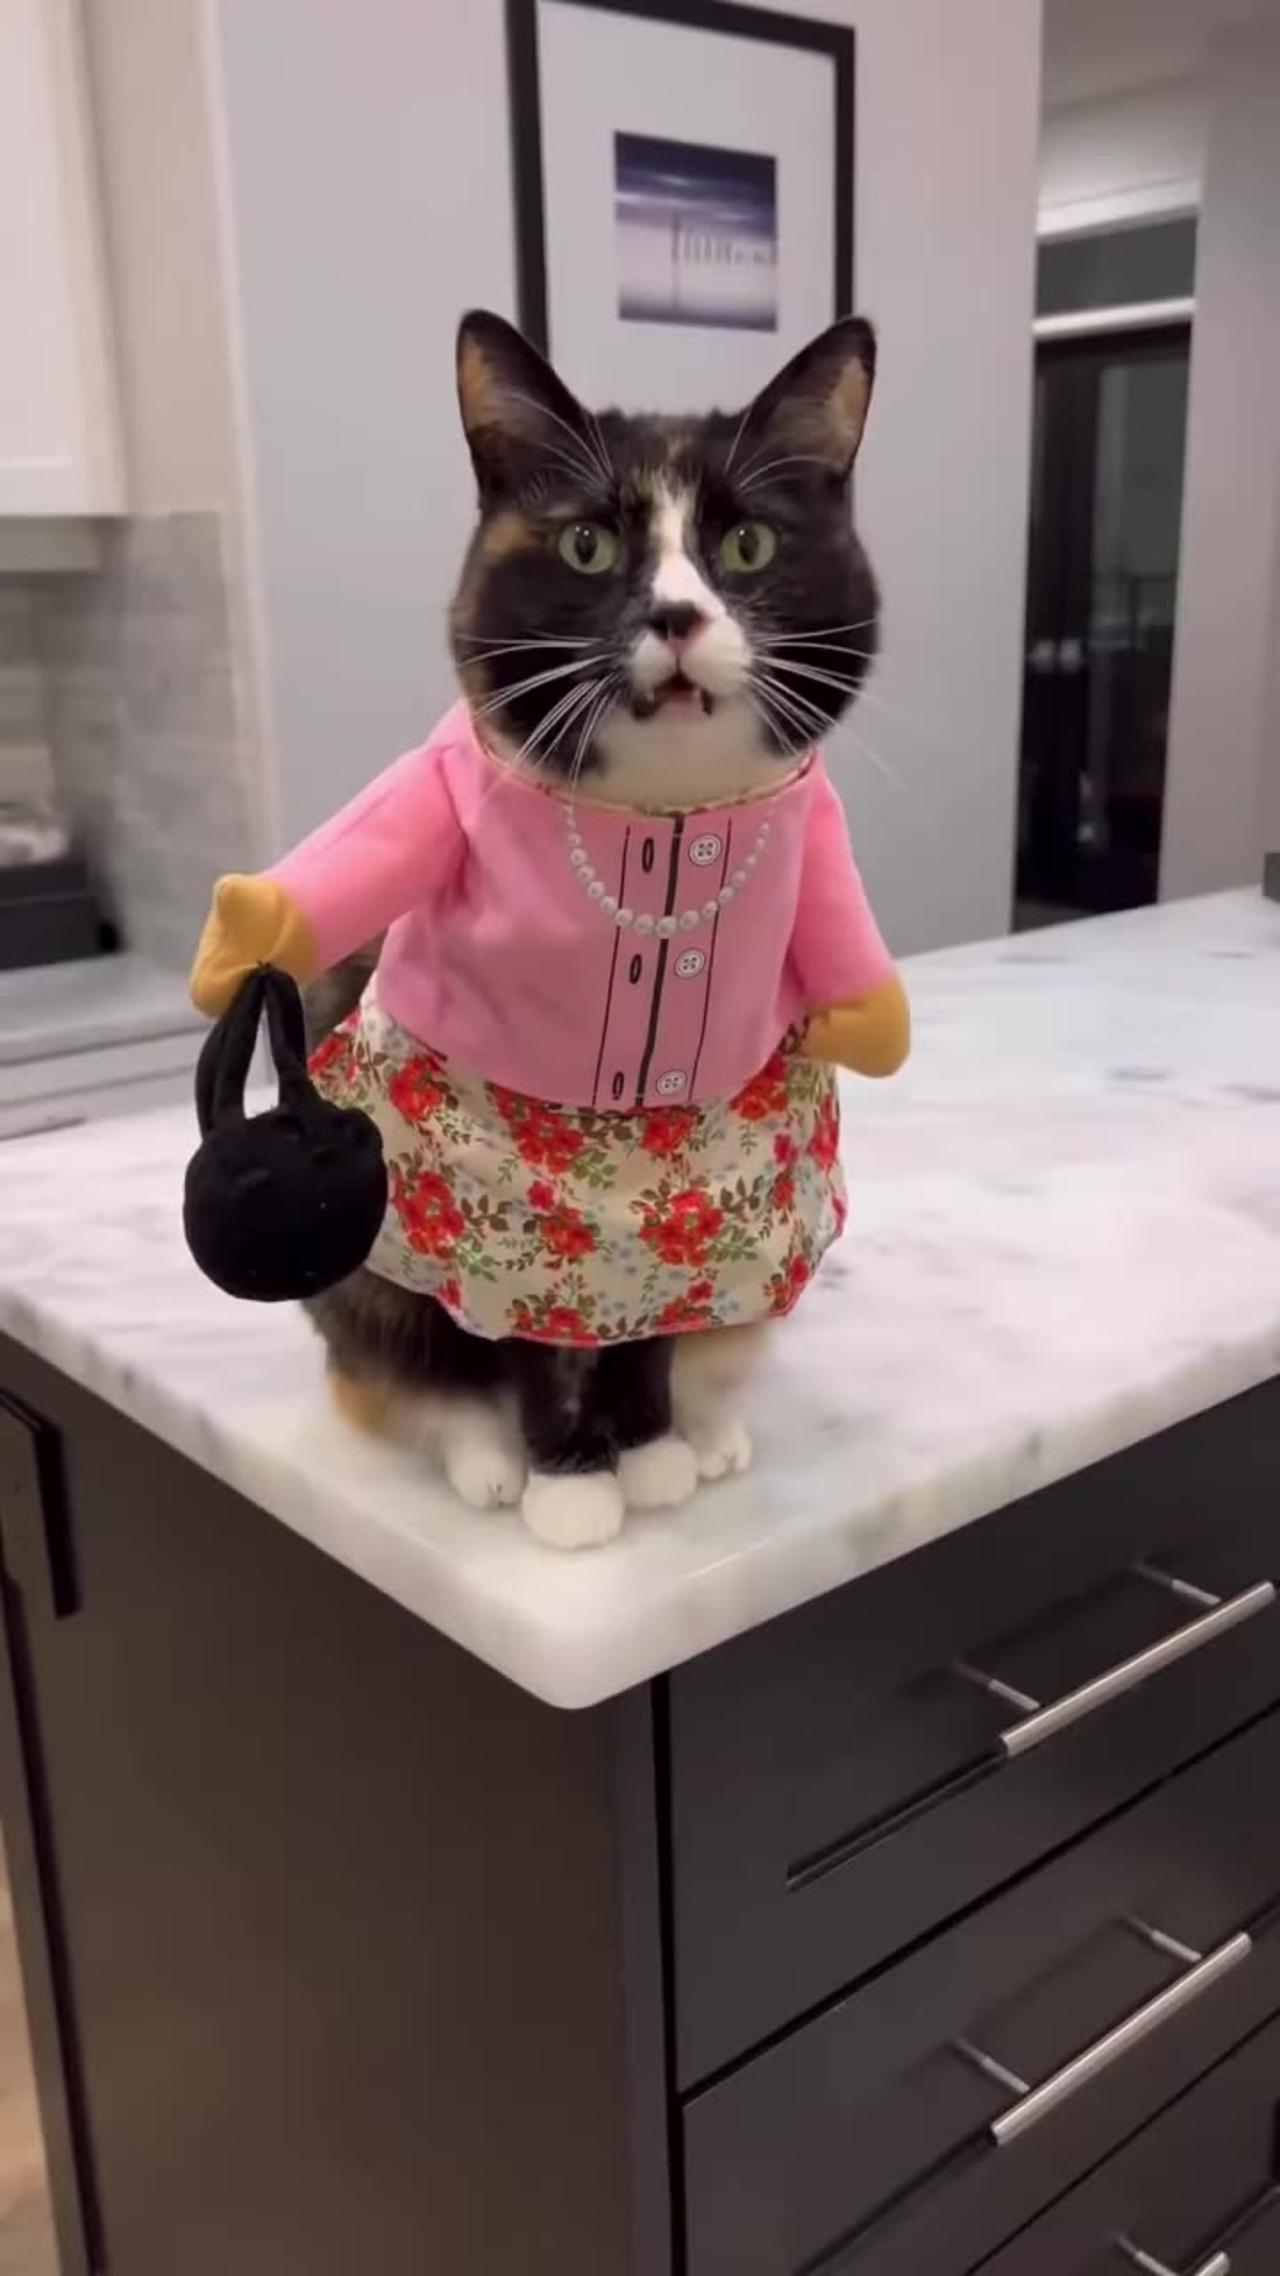 Just funny cat what the hell